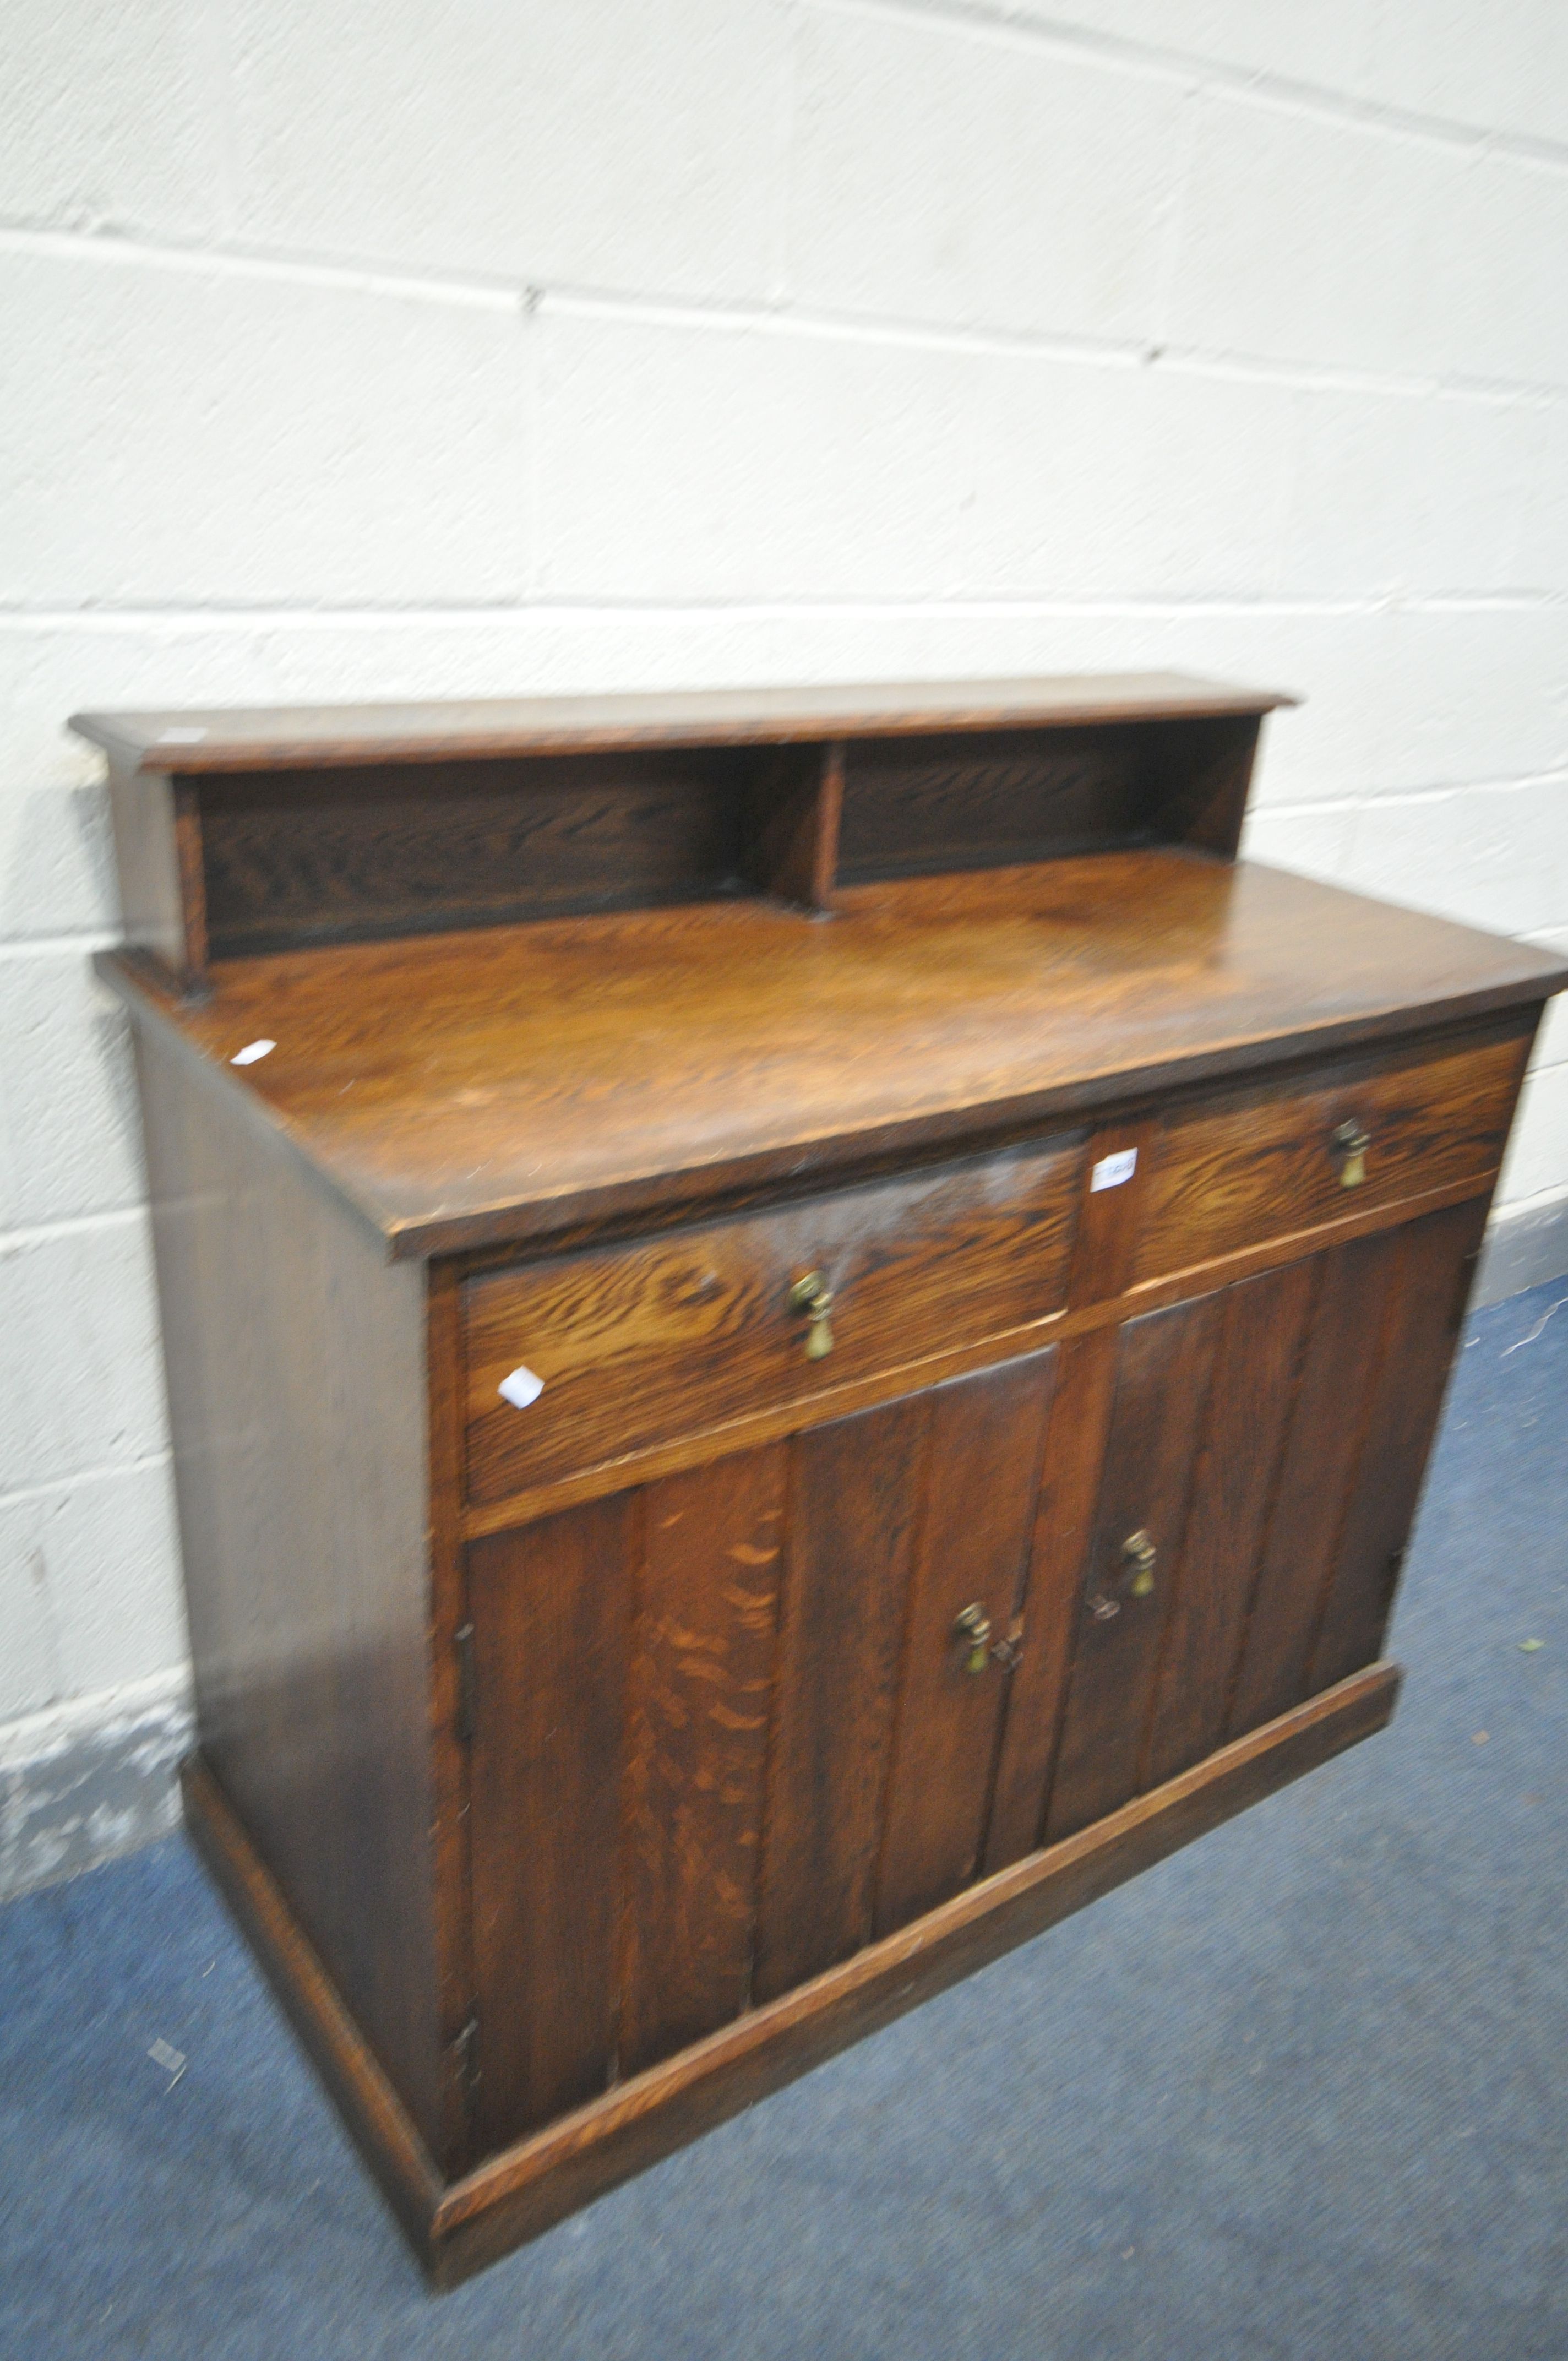 AN OAK SIDEBOARD, with a raised back, two drawers, over double cupboard doors, width 112cm x depth - Image 2 of 2